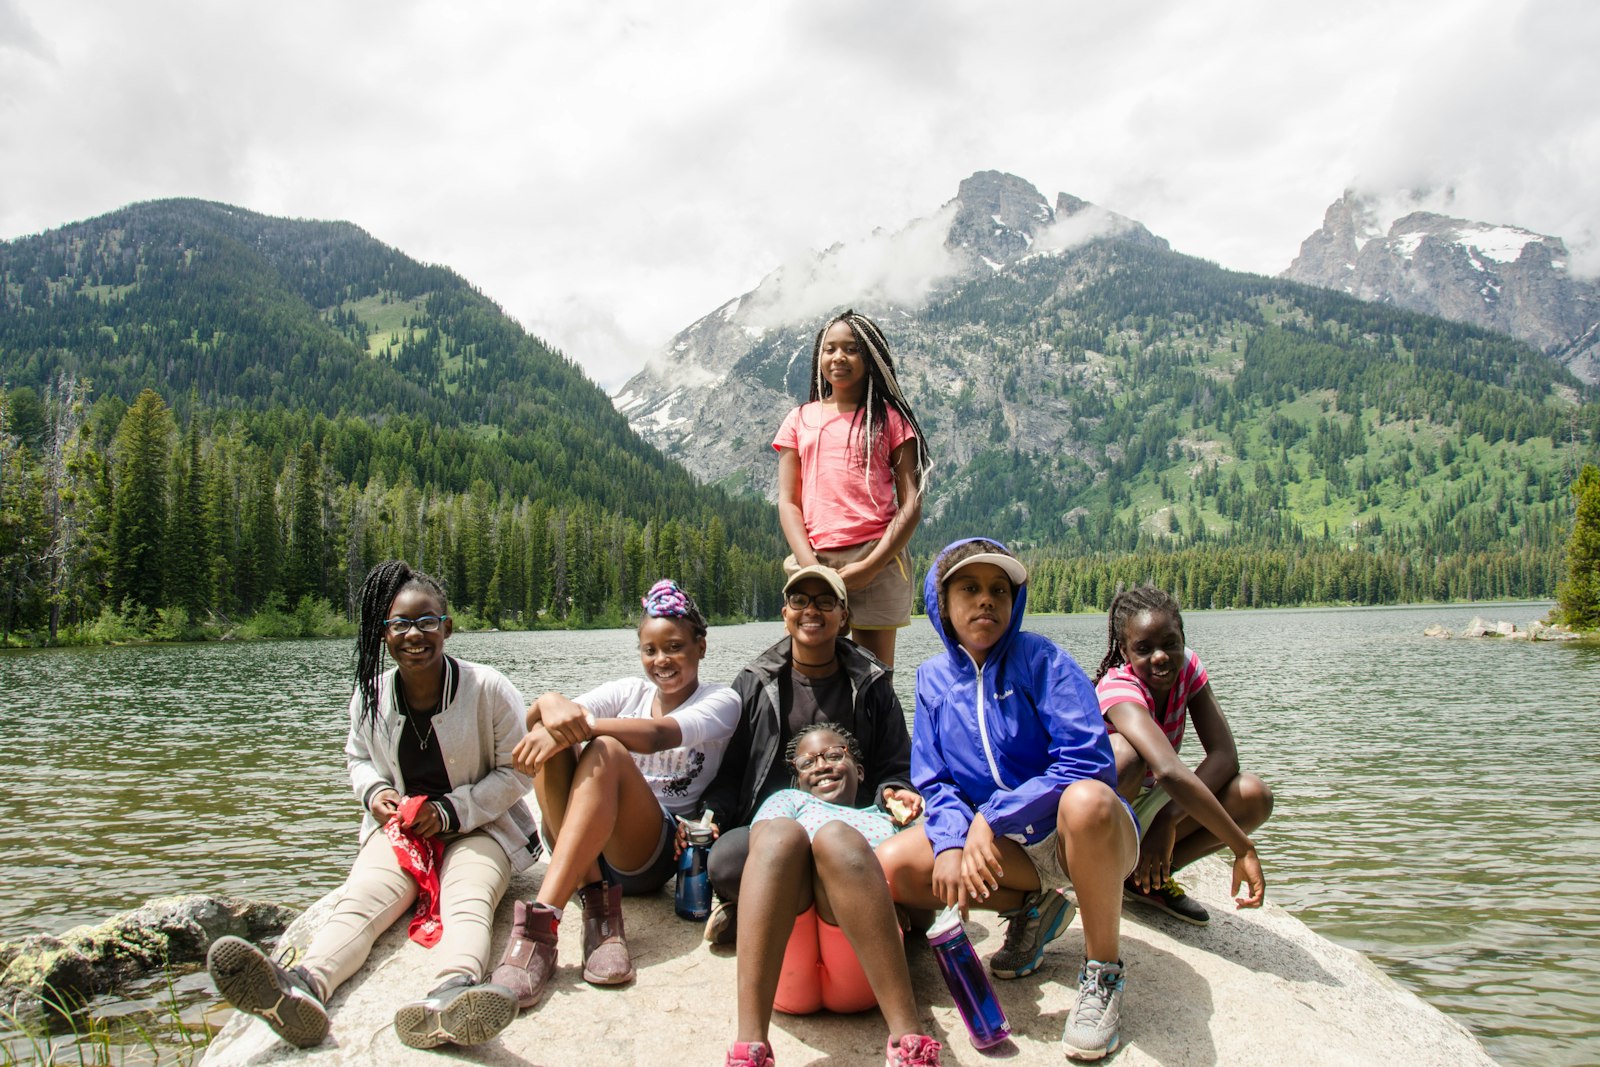 Desahray Johnson with City Kids participants sitting in front of a lake in Grand Teton National Park, 2017